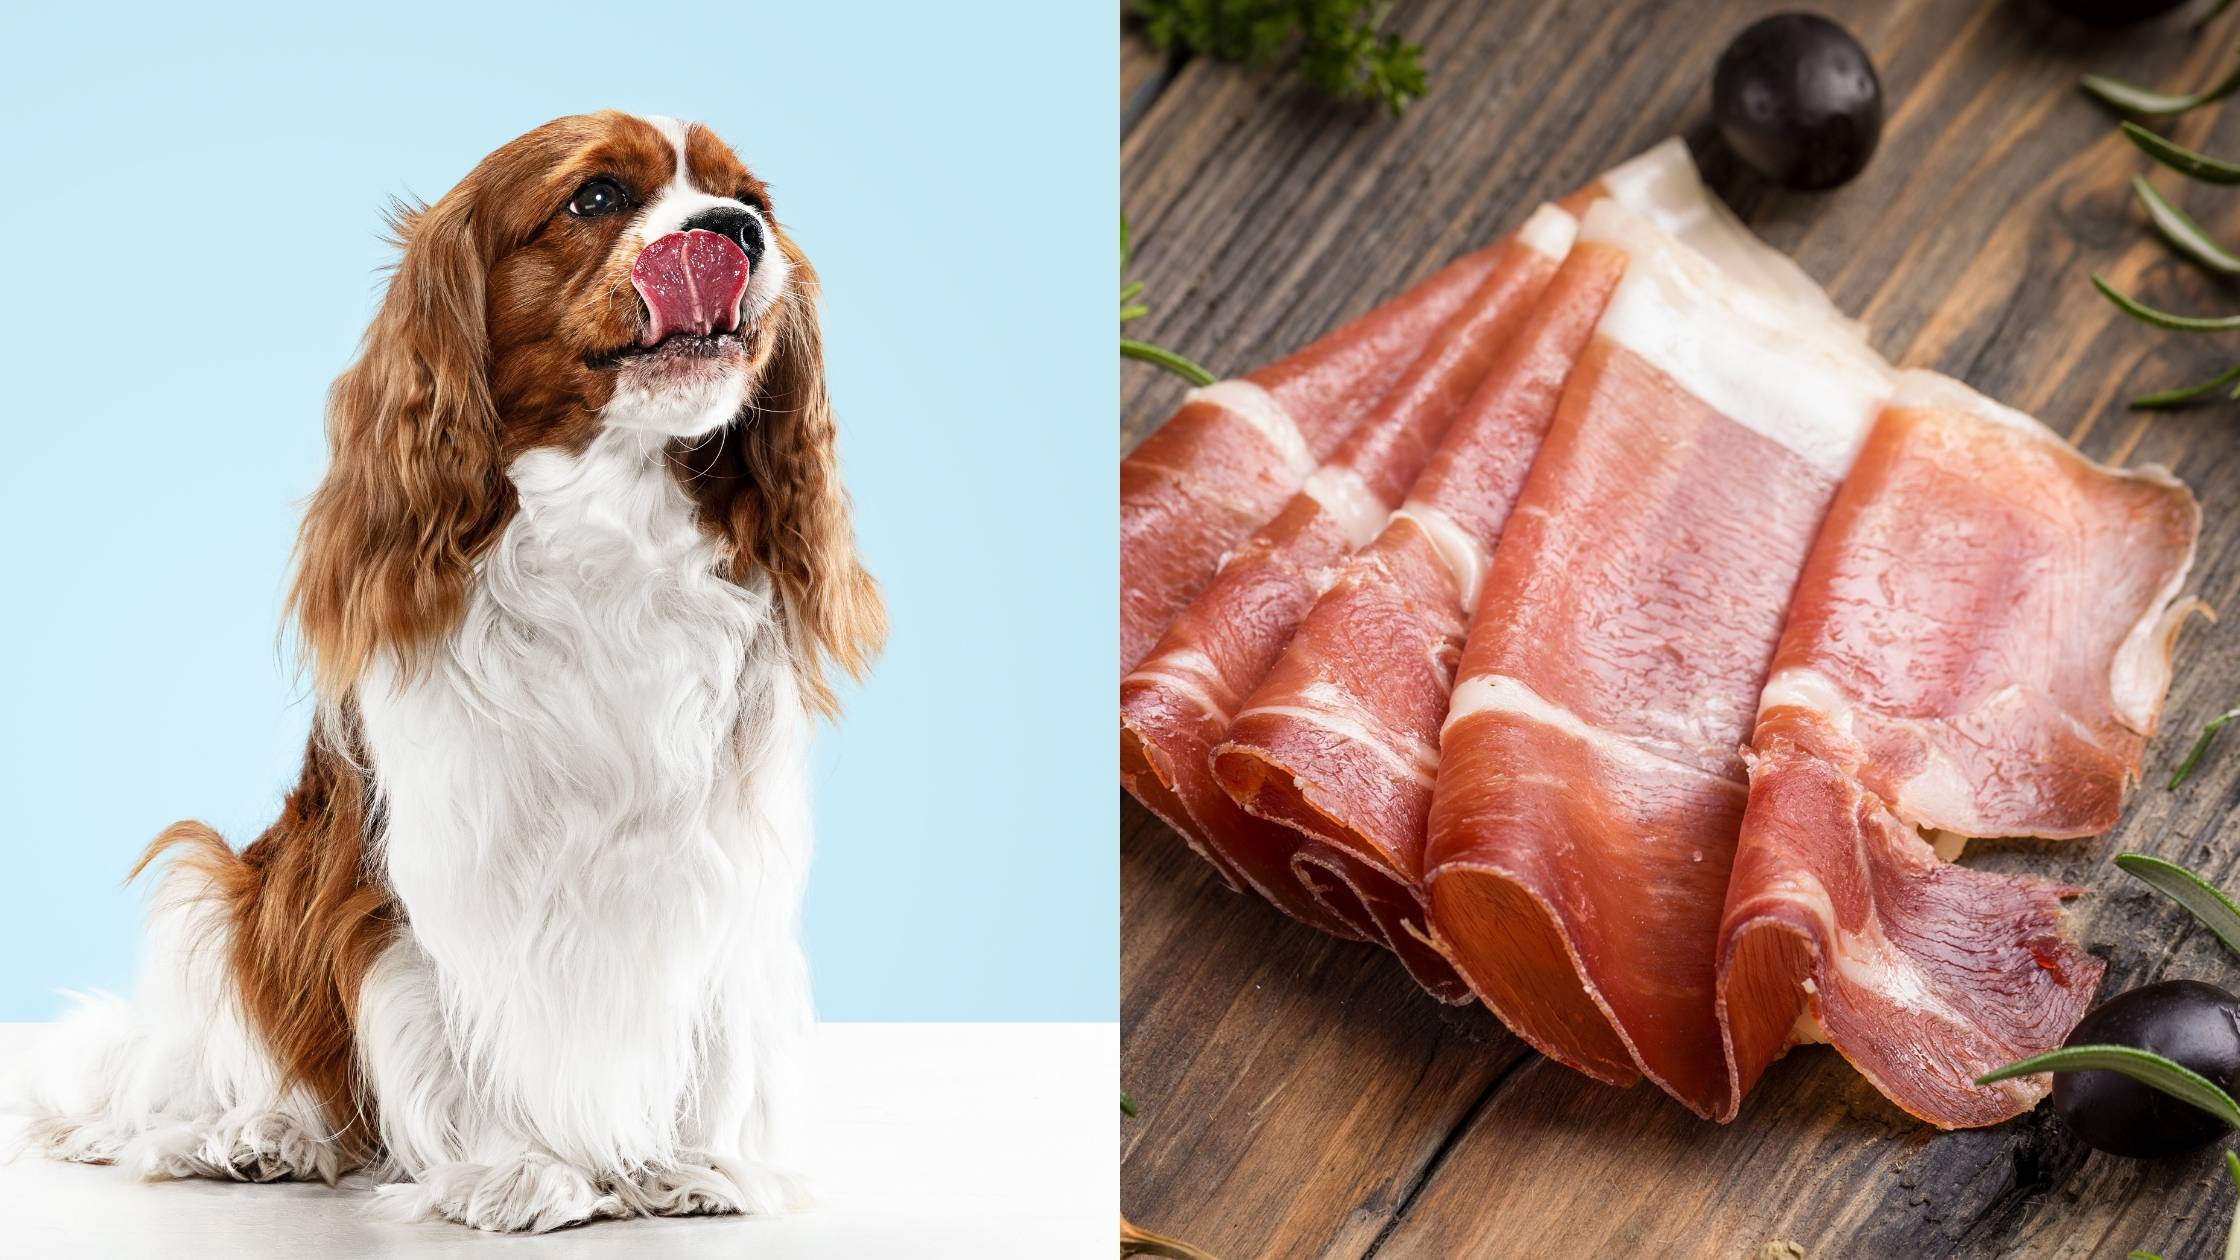 Can Dogs Eat Prosciutto